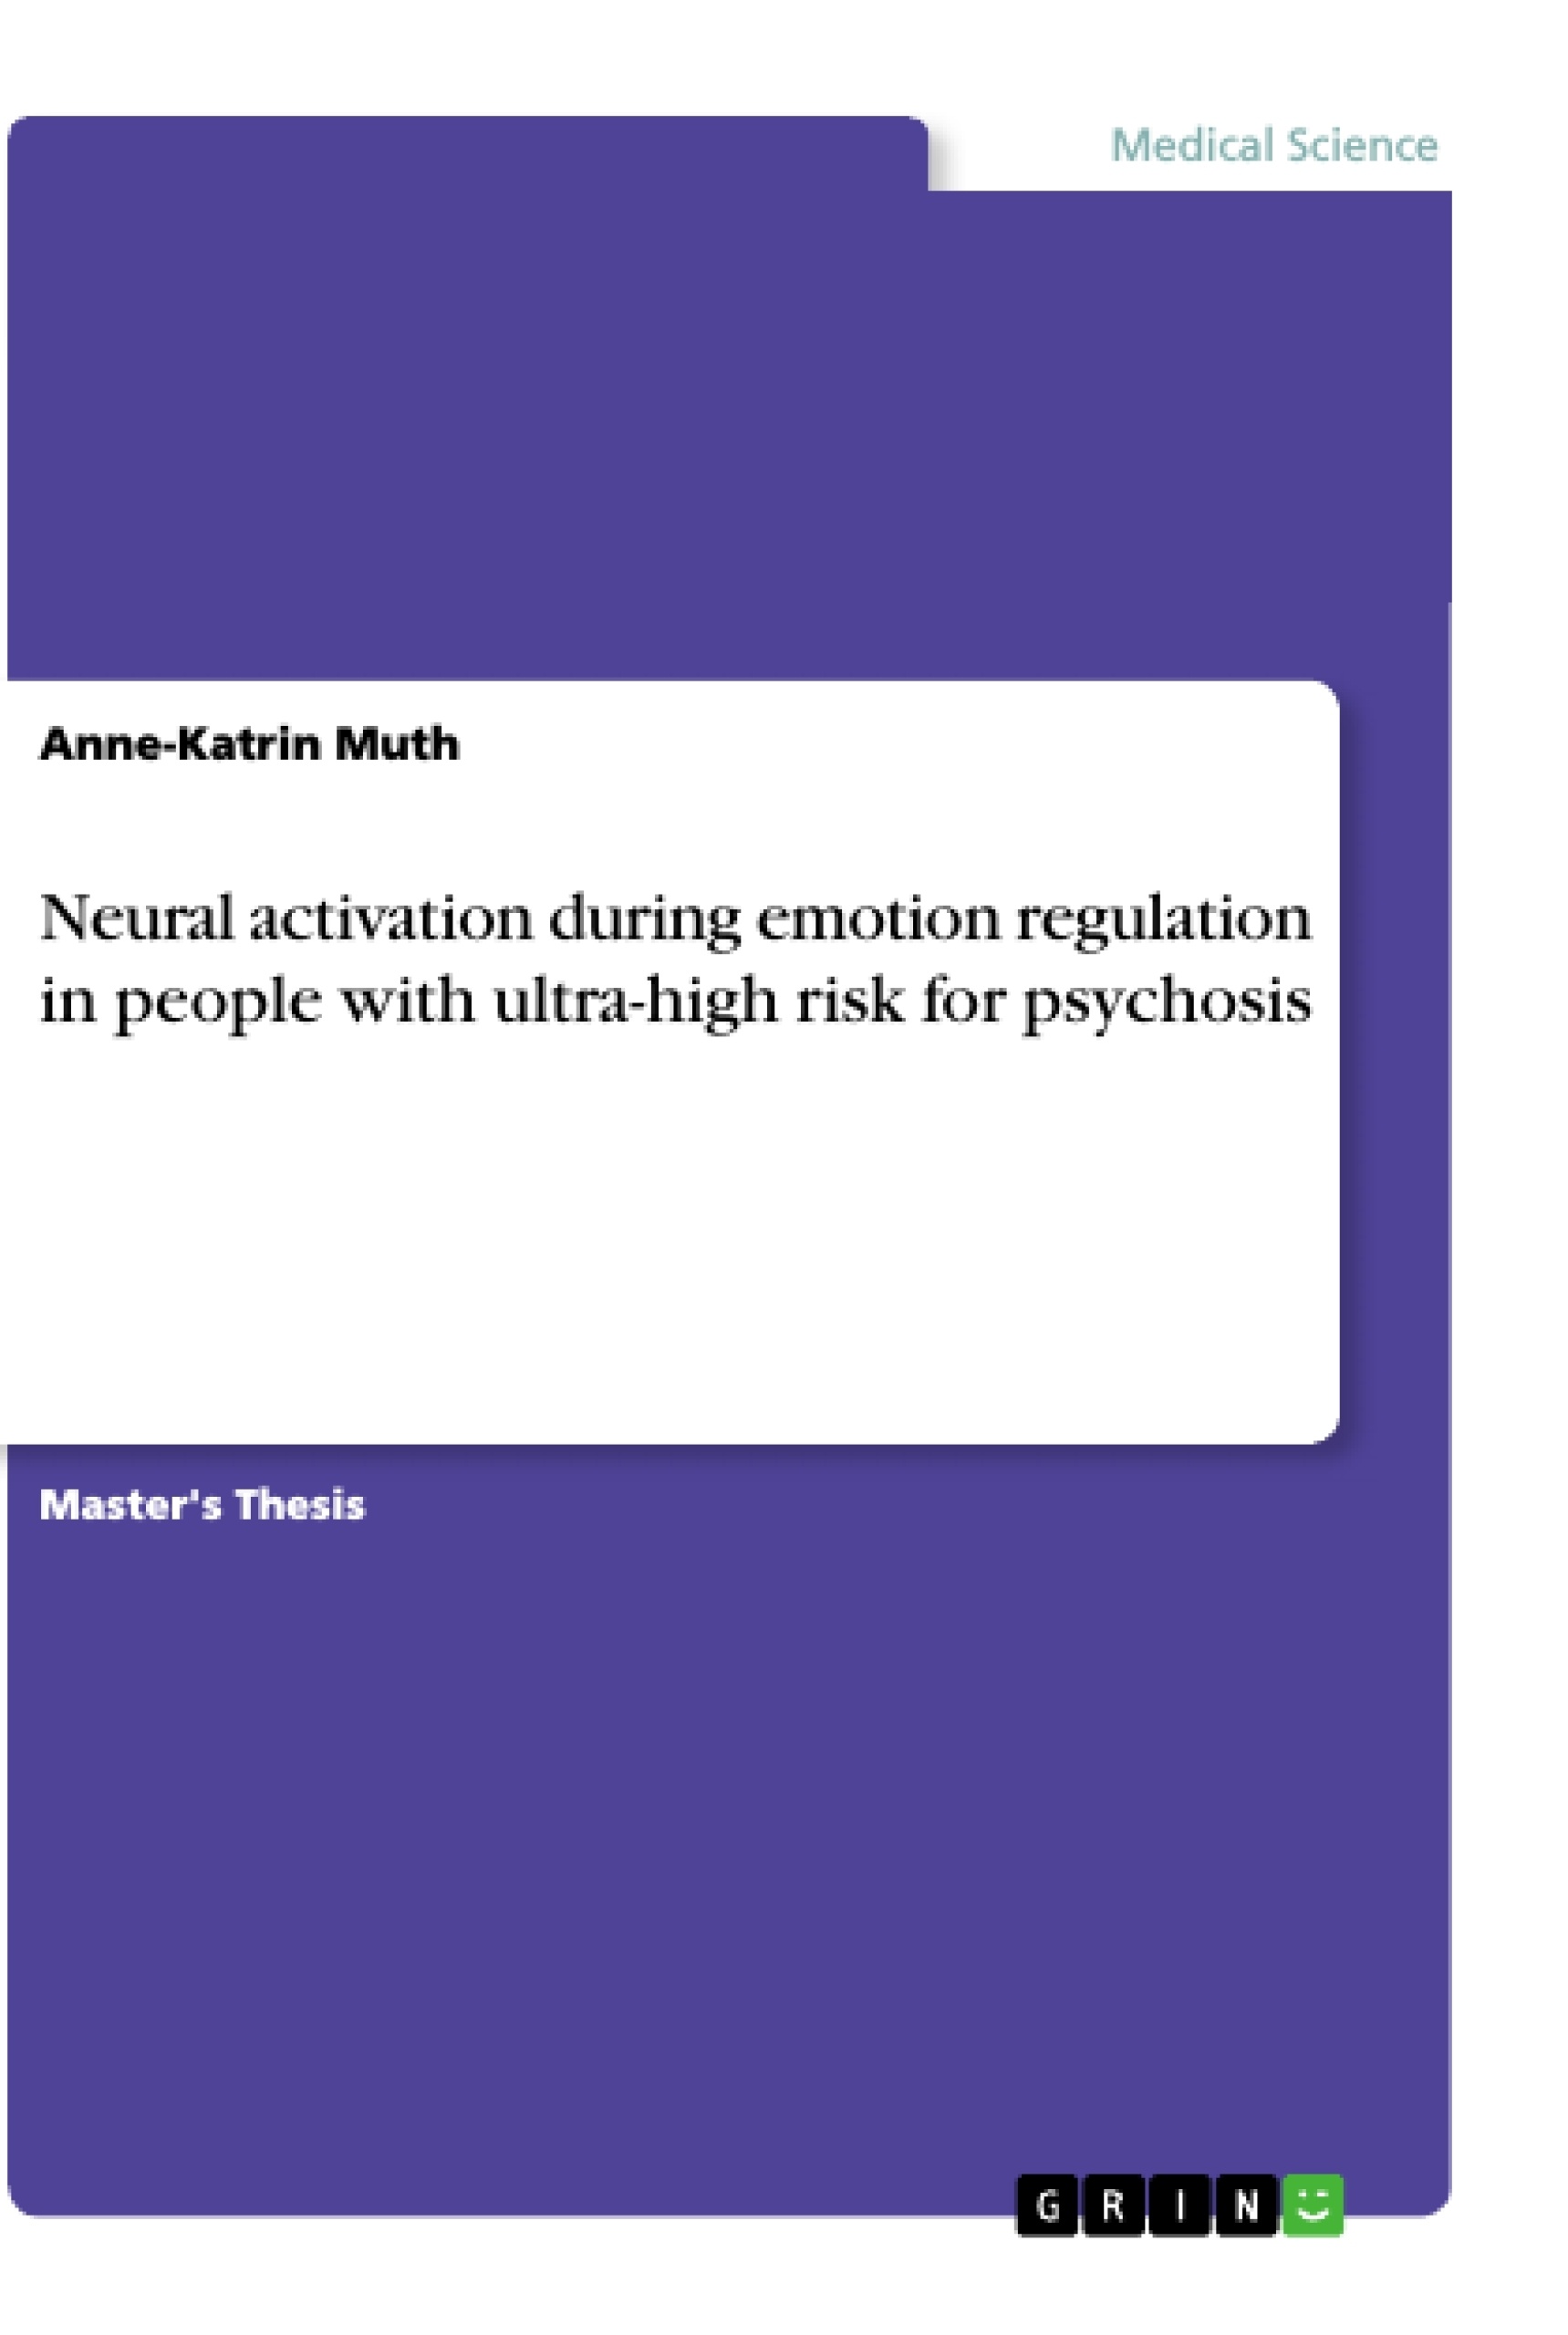 Título: Neural activation during emotion regulation in people with ultra-high risk for psychosis